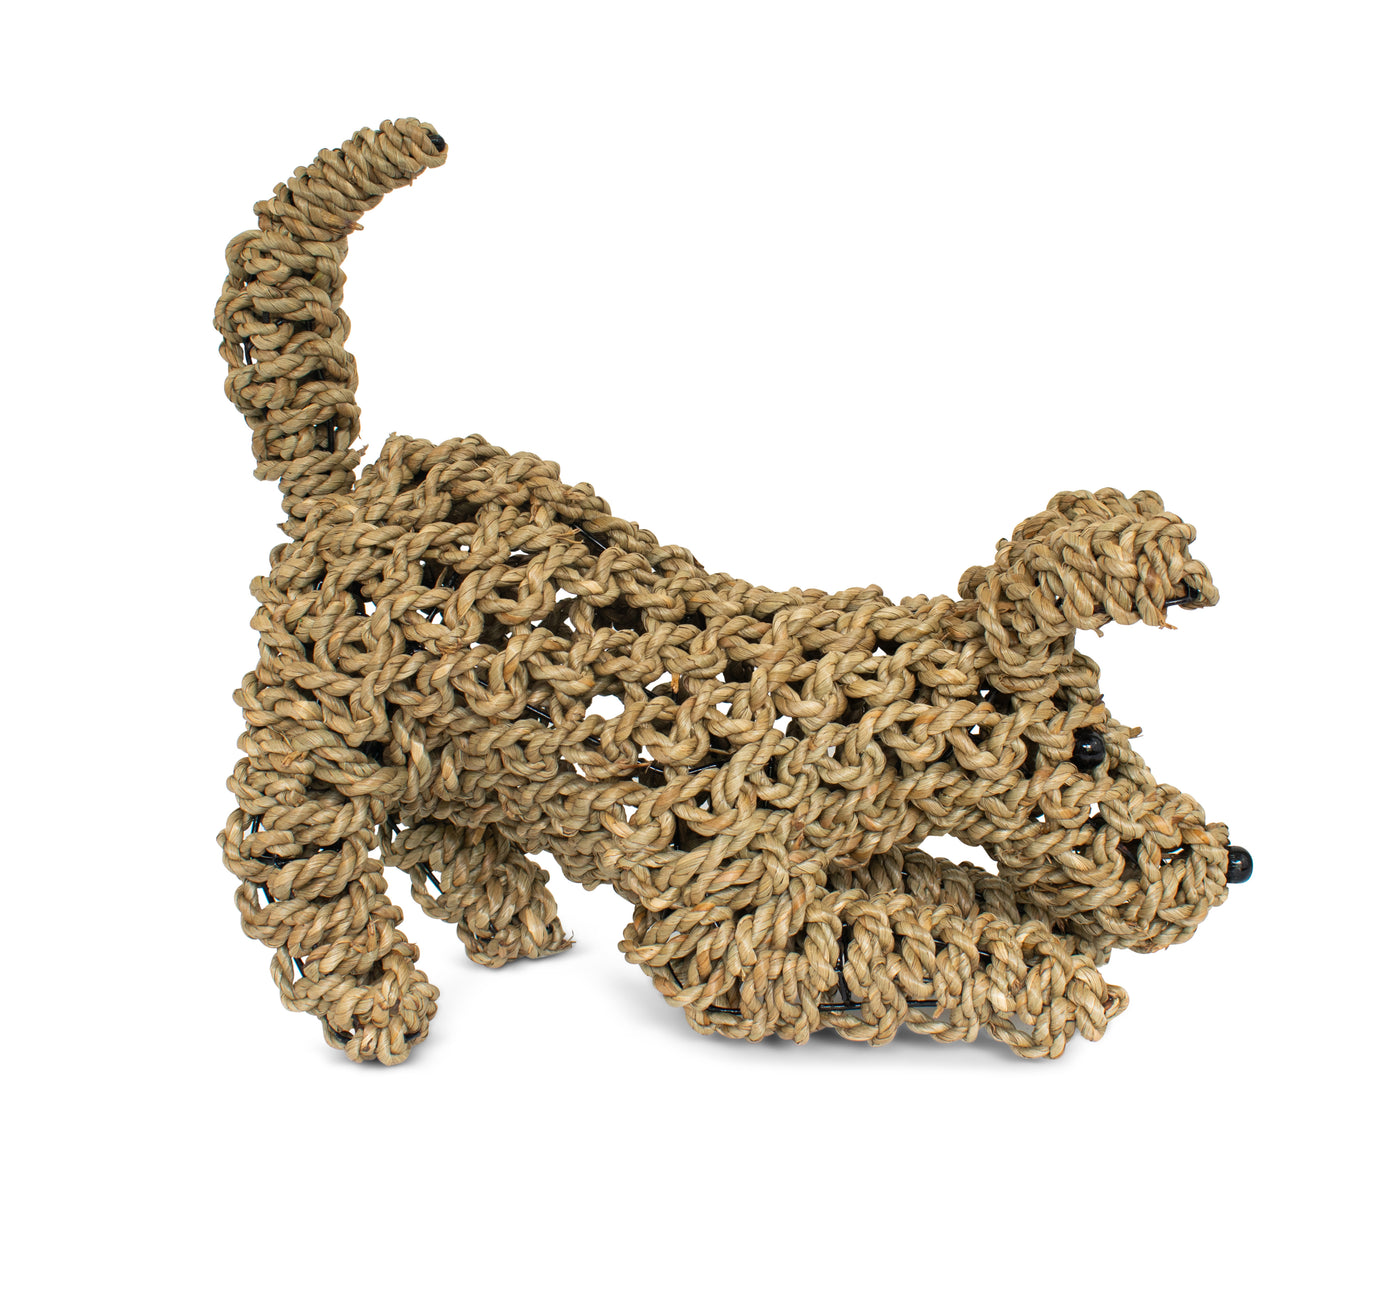 Hand Woven Playing Seagrass Dog Statue Sculpture Figurine Home Decor Decorative Handmade Handcrafted Gift Art Decoration Artwork Cute Puppy